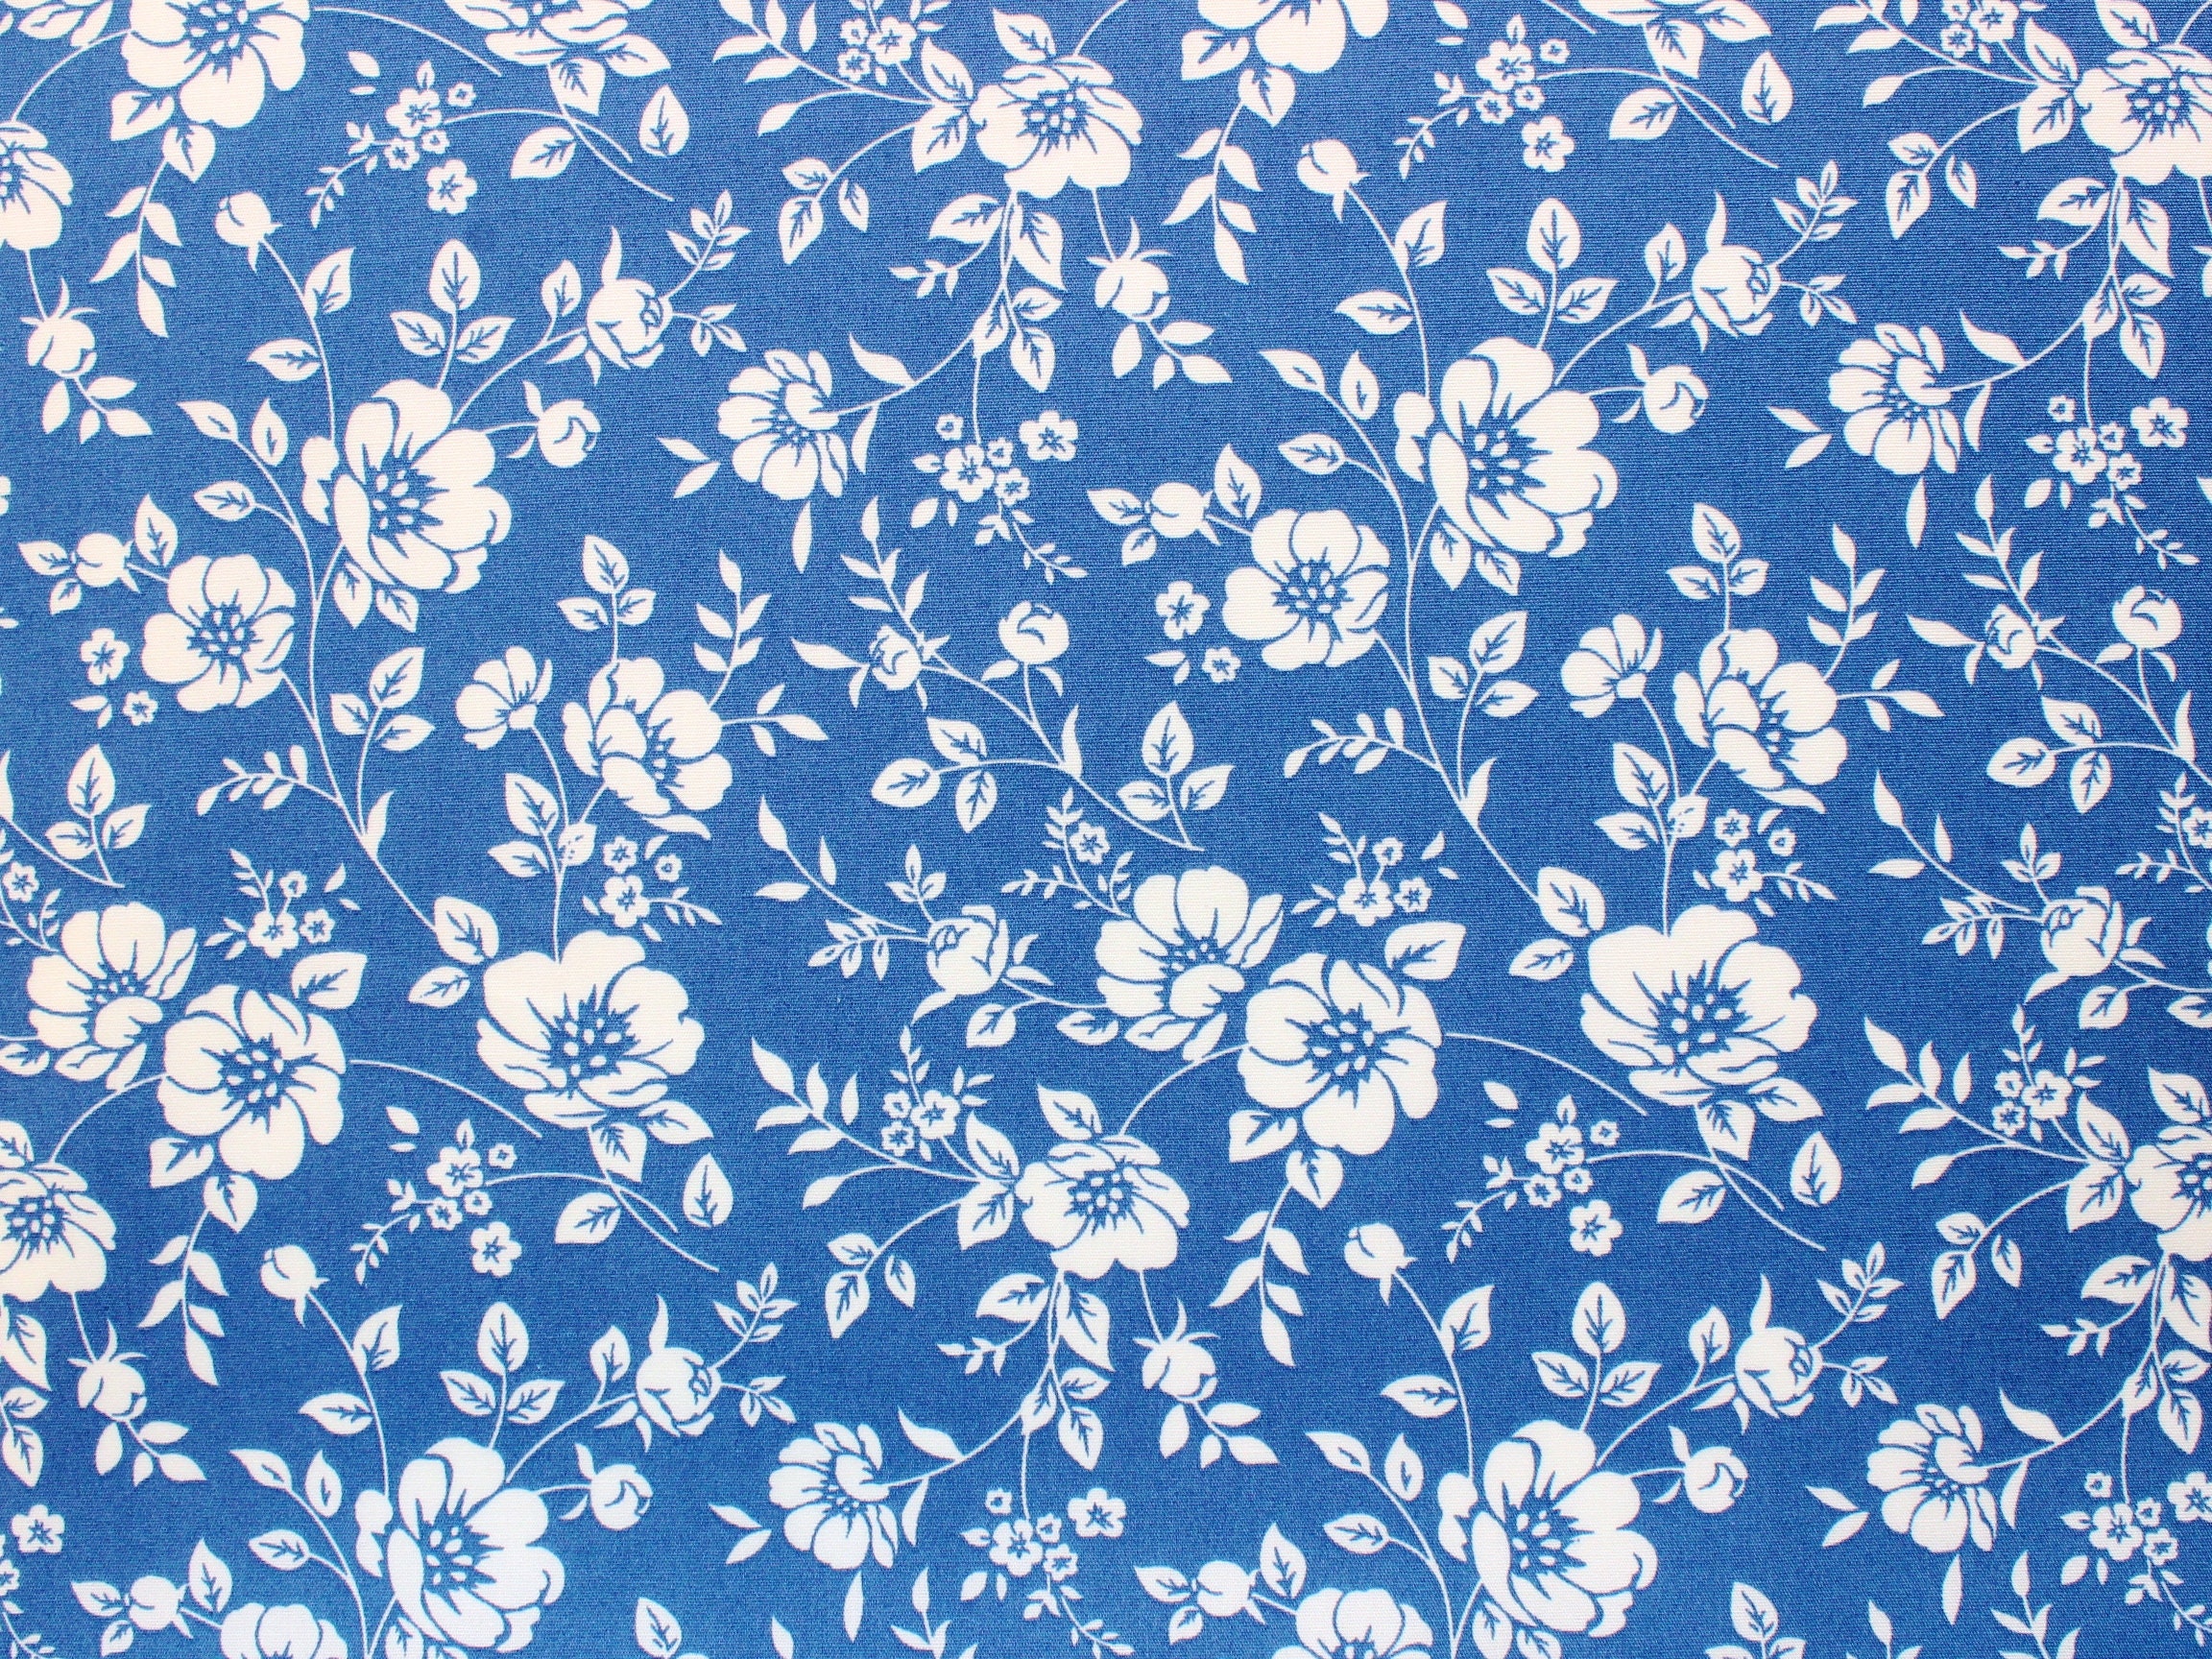 Spoonflower Fabric - Cute Blue Floral Animals Rabbit Botanical Pockets  Printed on Cotton Poplin Fabric Fat Quarter - Sewing Shirting Quilting  Dresses Apparel Crafts 